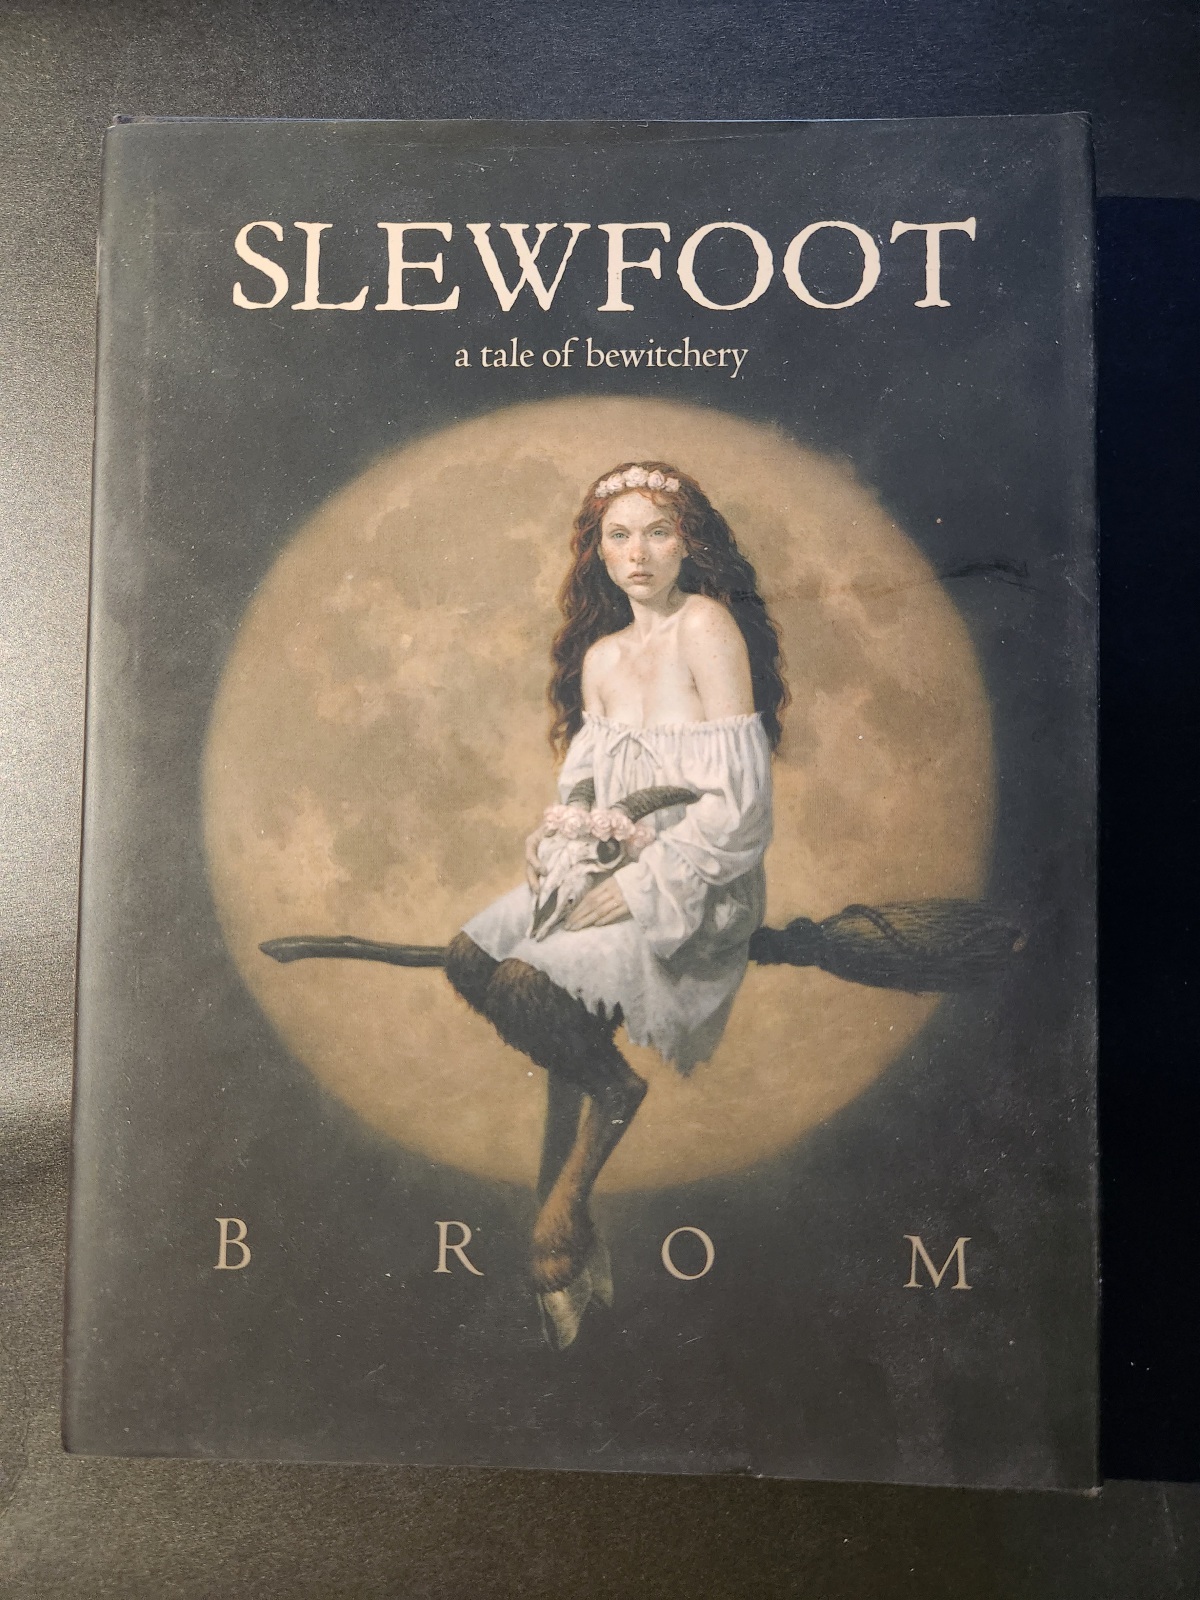 slewfoot by brom 2021 first edition